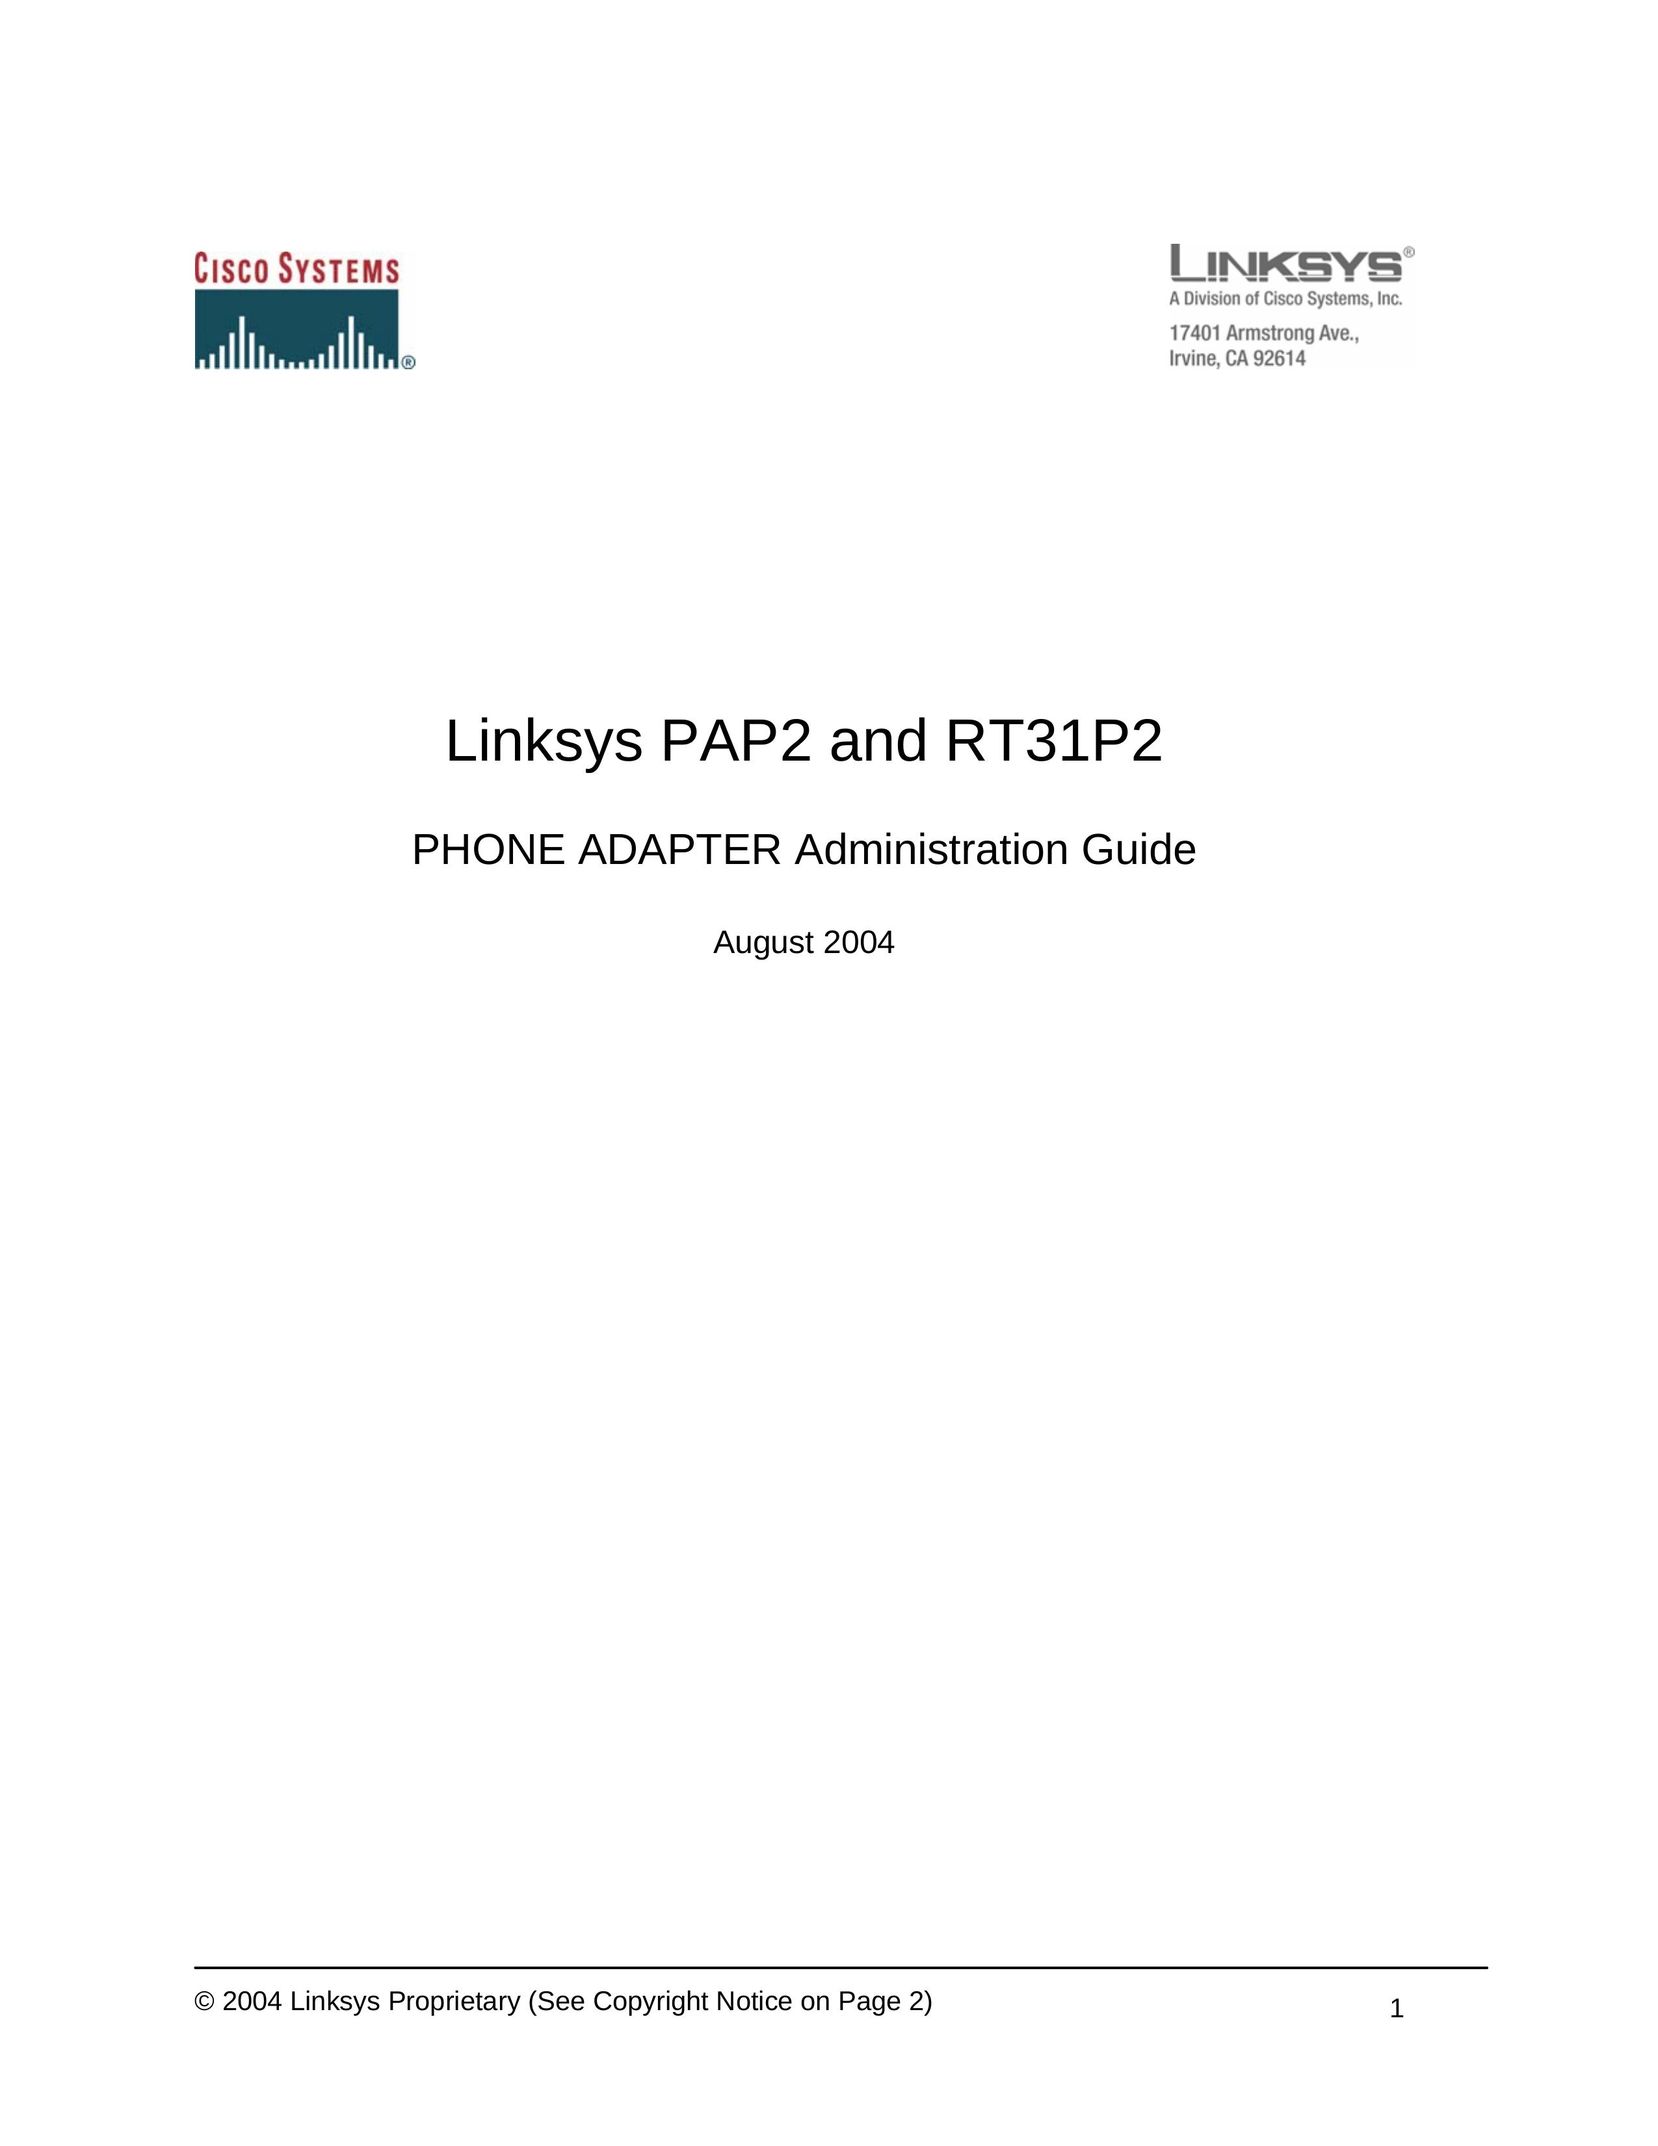 Cisco Systems Linksys PAP2 Telephone Accessories User Manual